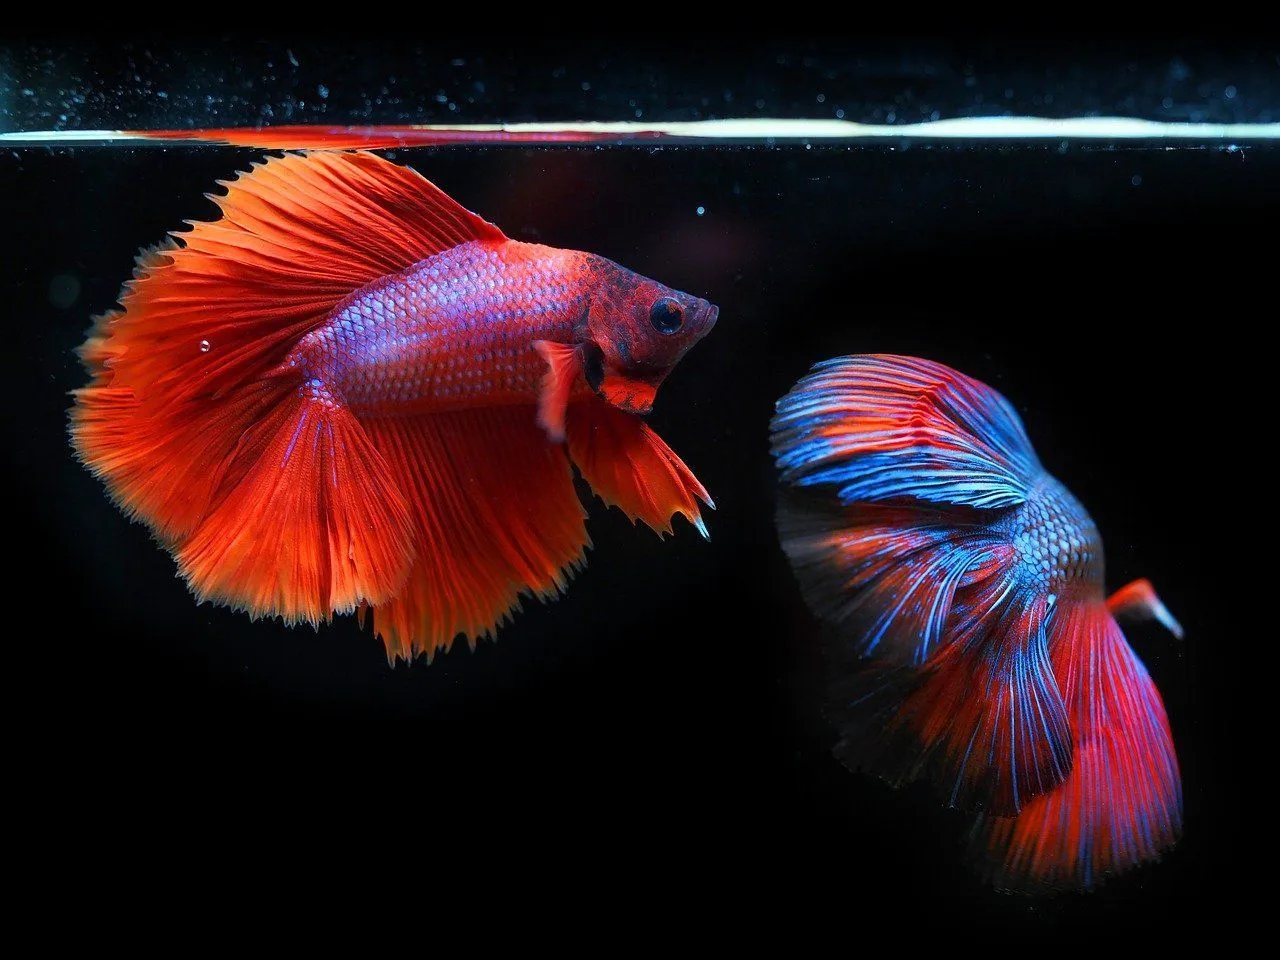 Read about the plants used to decorate active betta fish tanks, healthy food that helps it live longer, and how to maintain the water temperature in the tank via a heater.